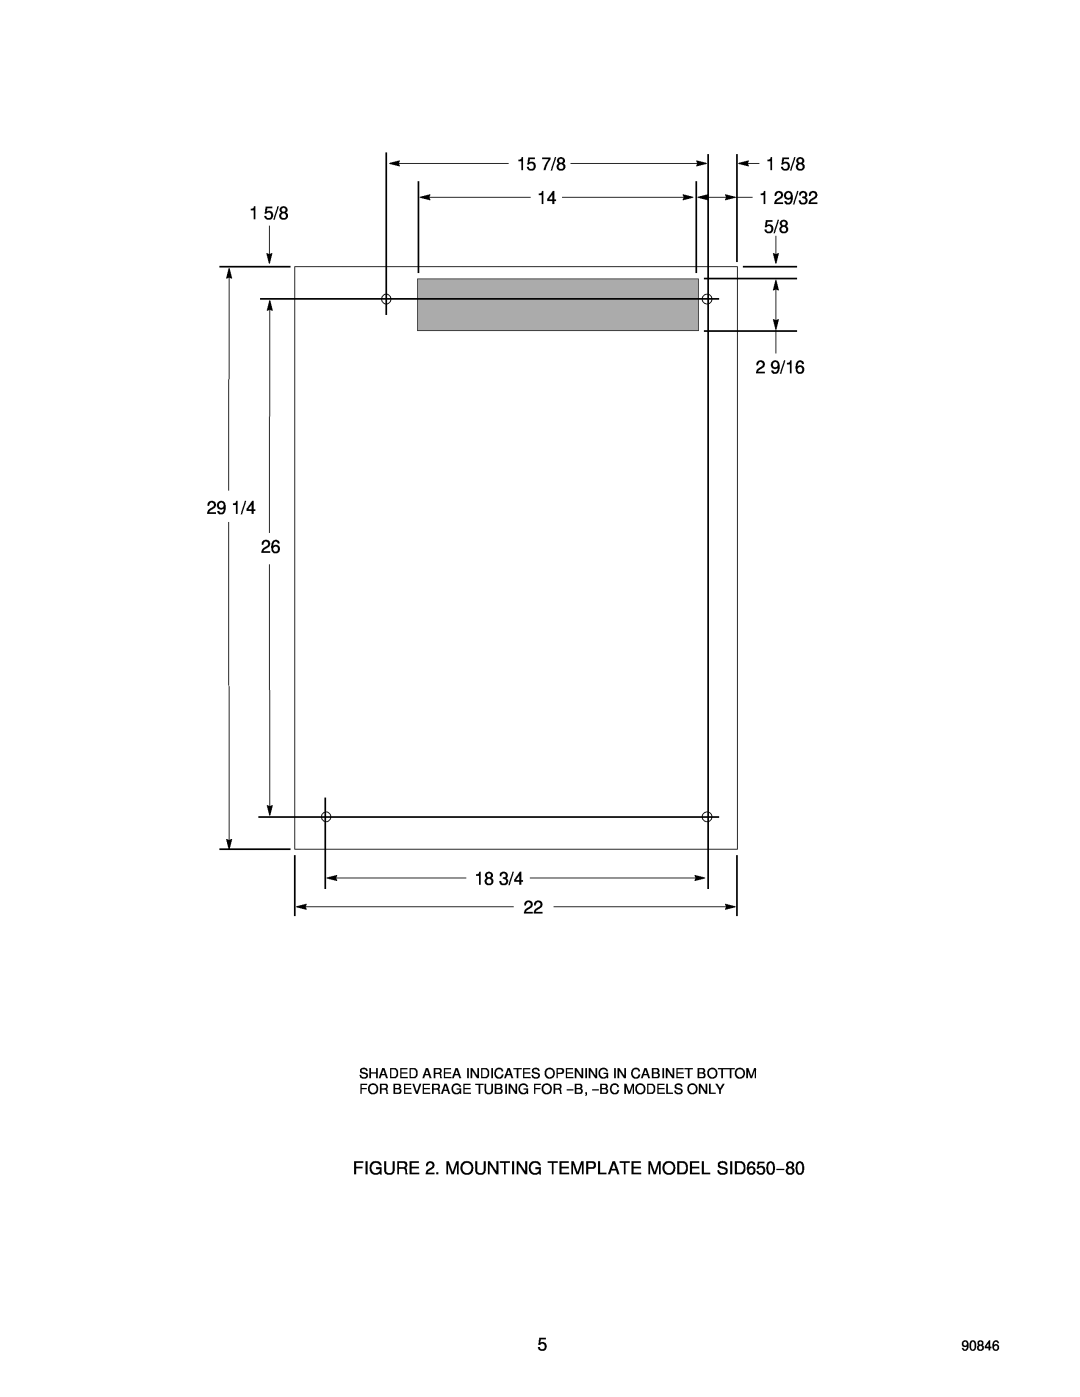 Everpure SID650A manual 15 7/8, 1 5/8, 1 29/32, 2 9/16, 29 1/4, 18 3/4, MOUNTING TEMPLATE MODEL SID650--80 